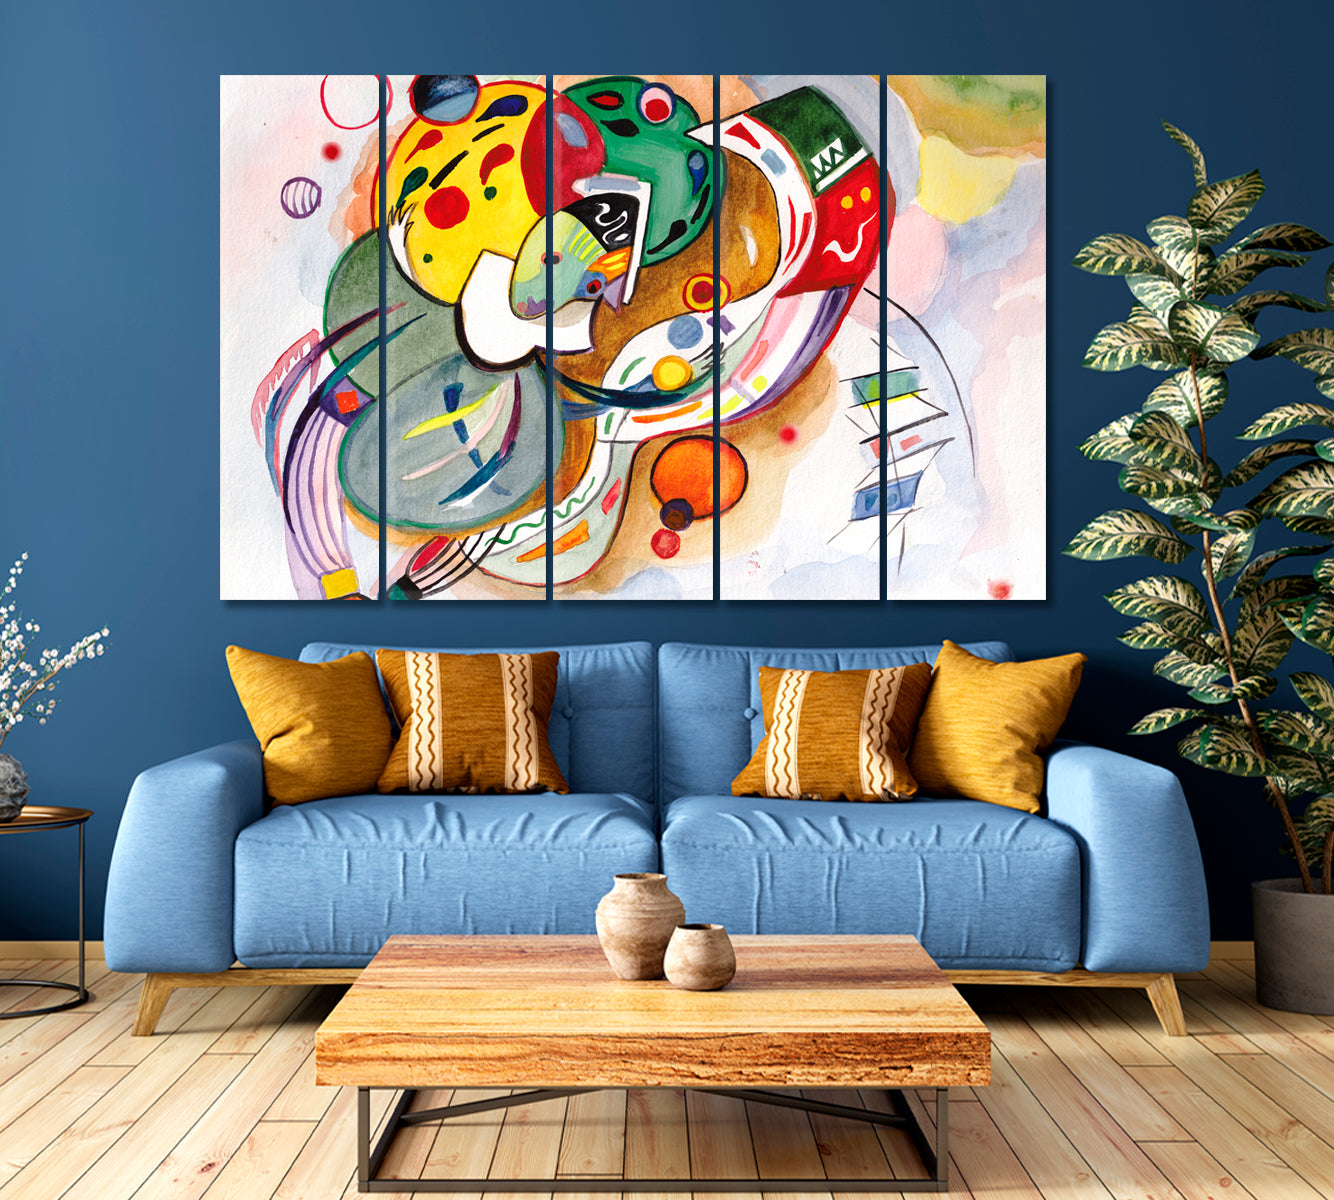 CLOWN Inspired By Kandinsky Trendy Abstract Figurative Contemporary Art Artesty 5 panels 36" x 24" 